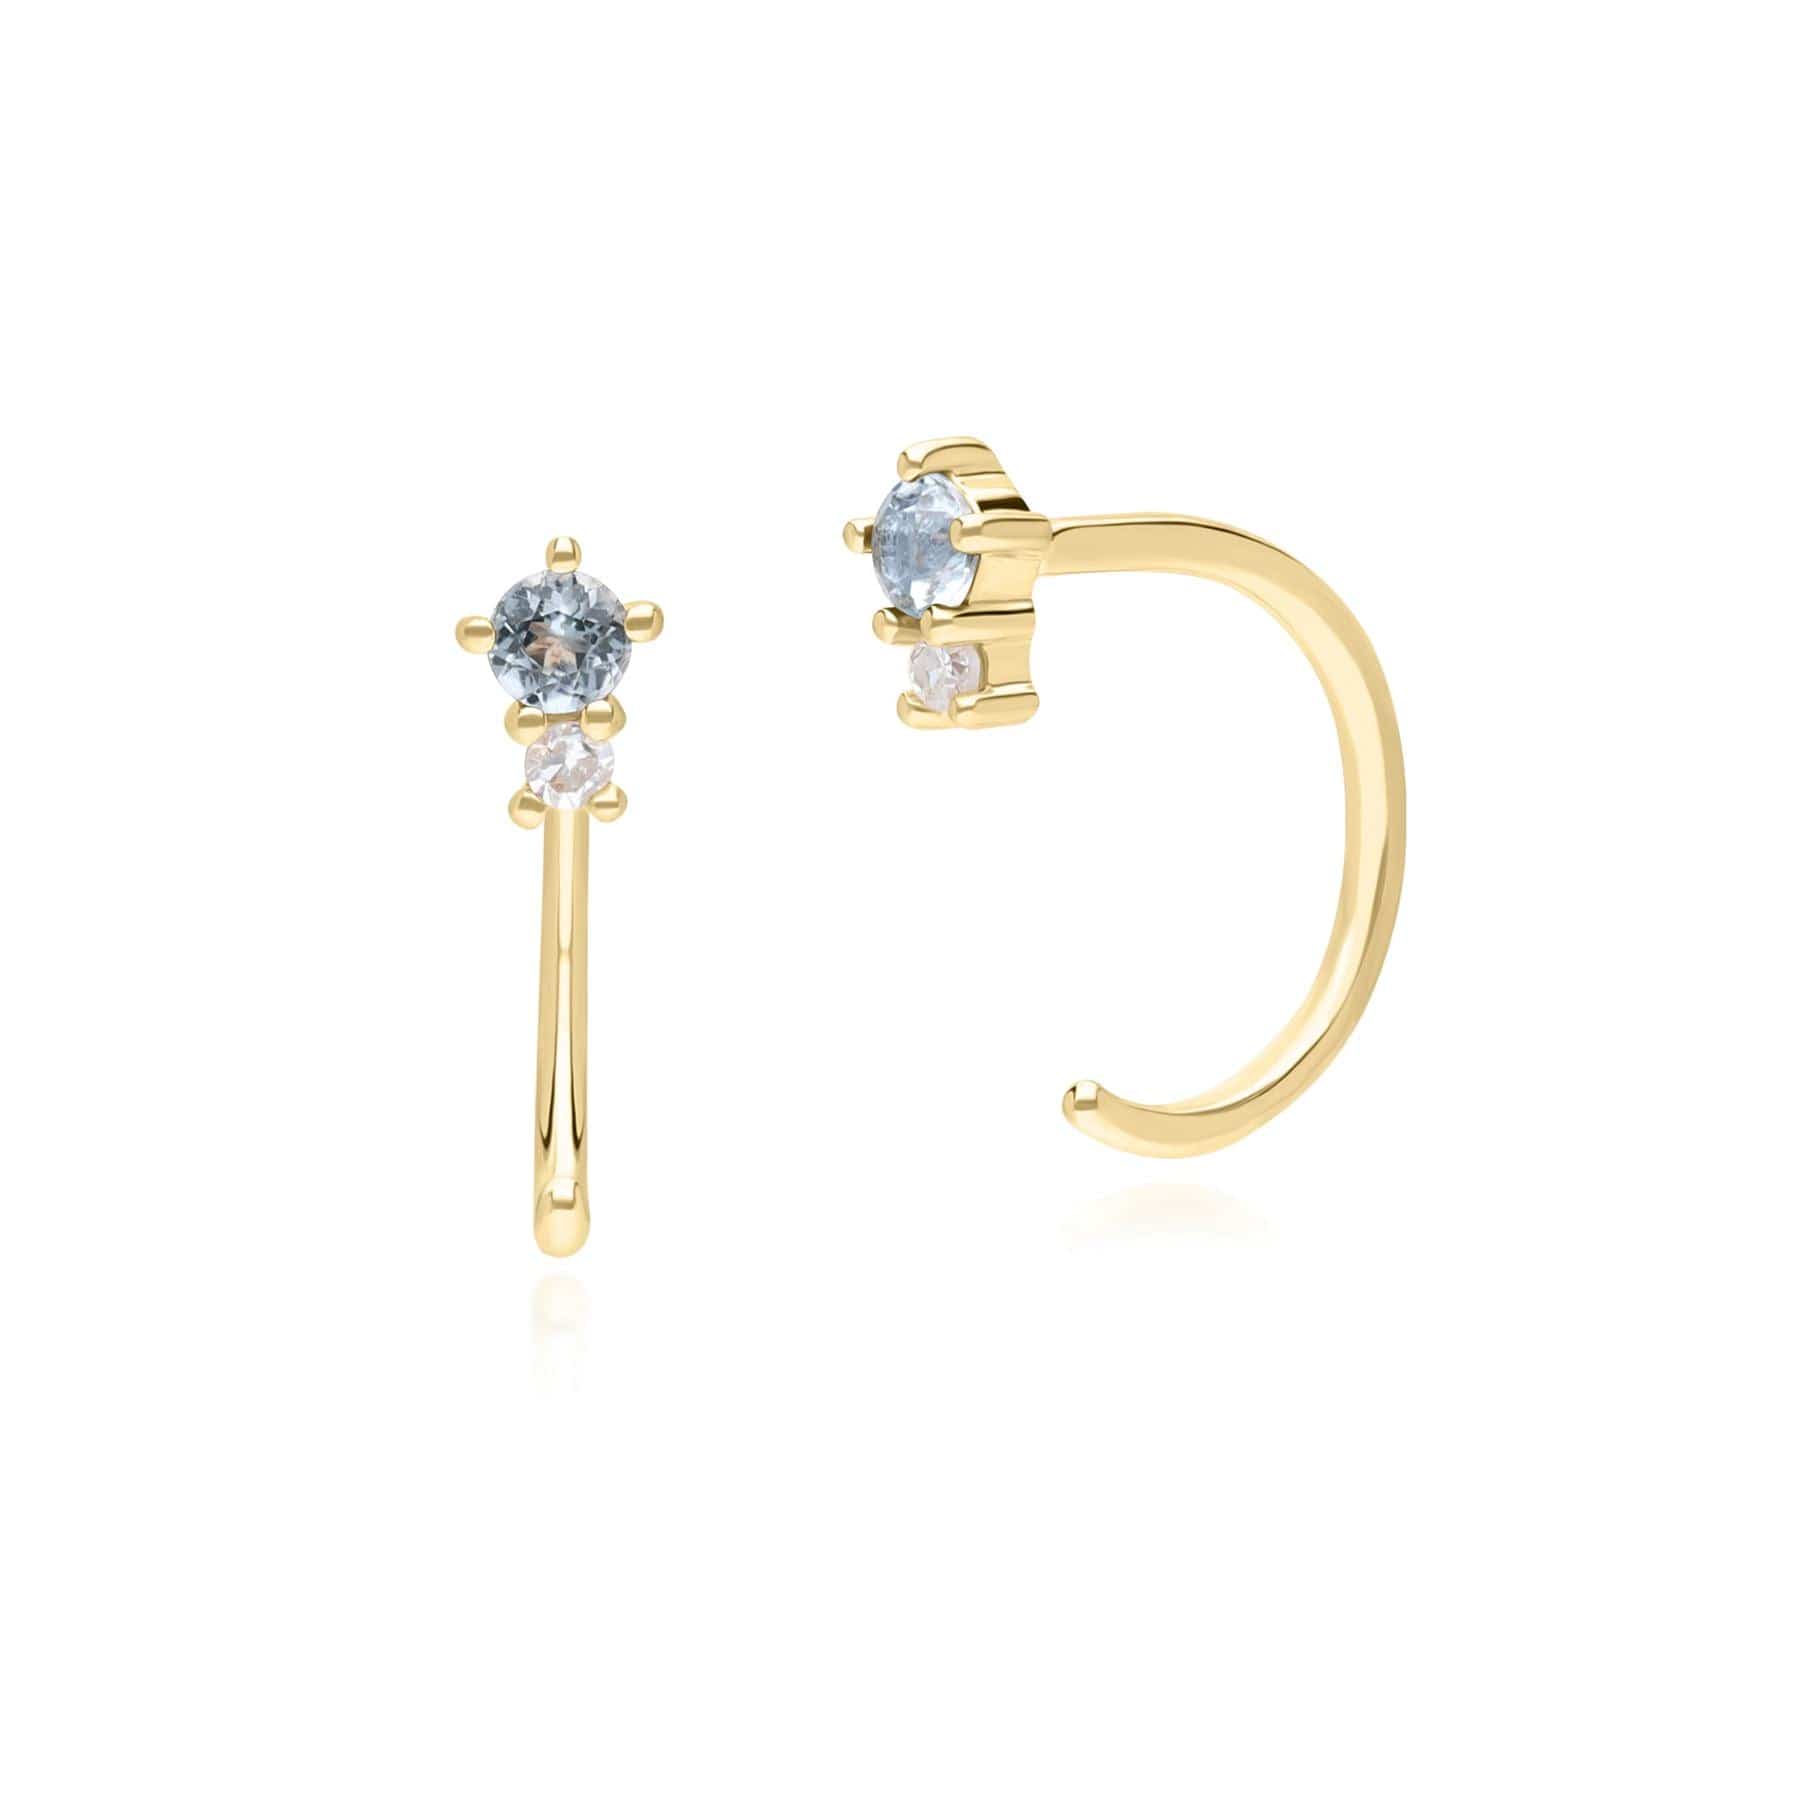 135E1823039 Modern Classic Sky Blue Topaz & Diamond Pull Through Hoop Earrings in 9ct Yellow Gold Front